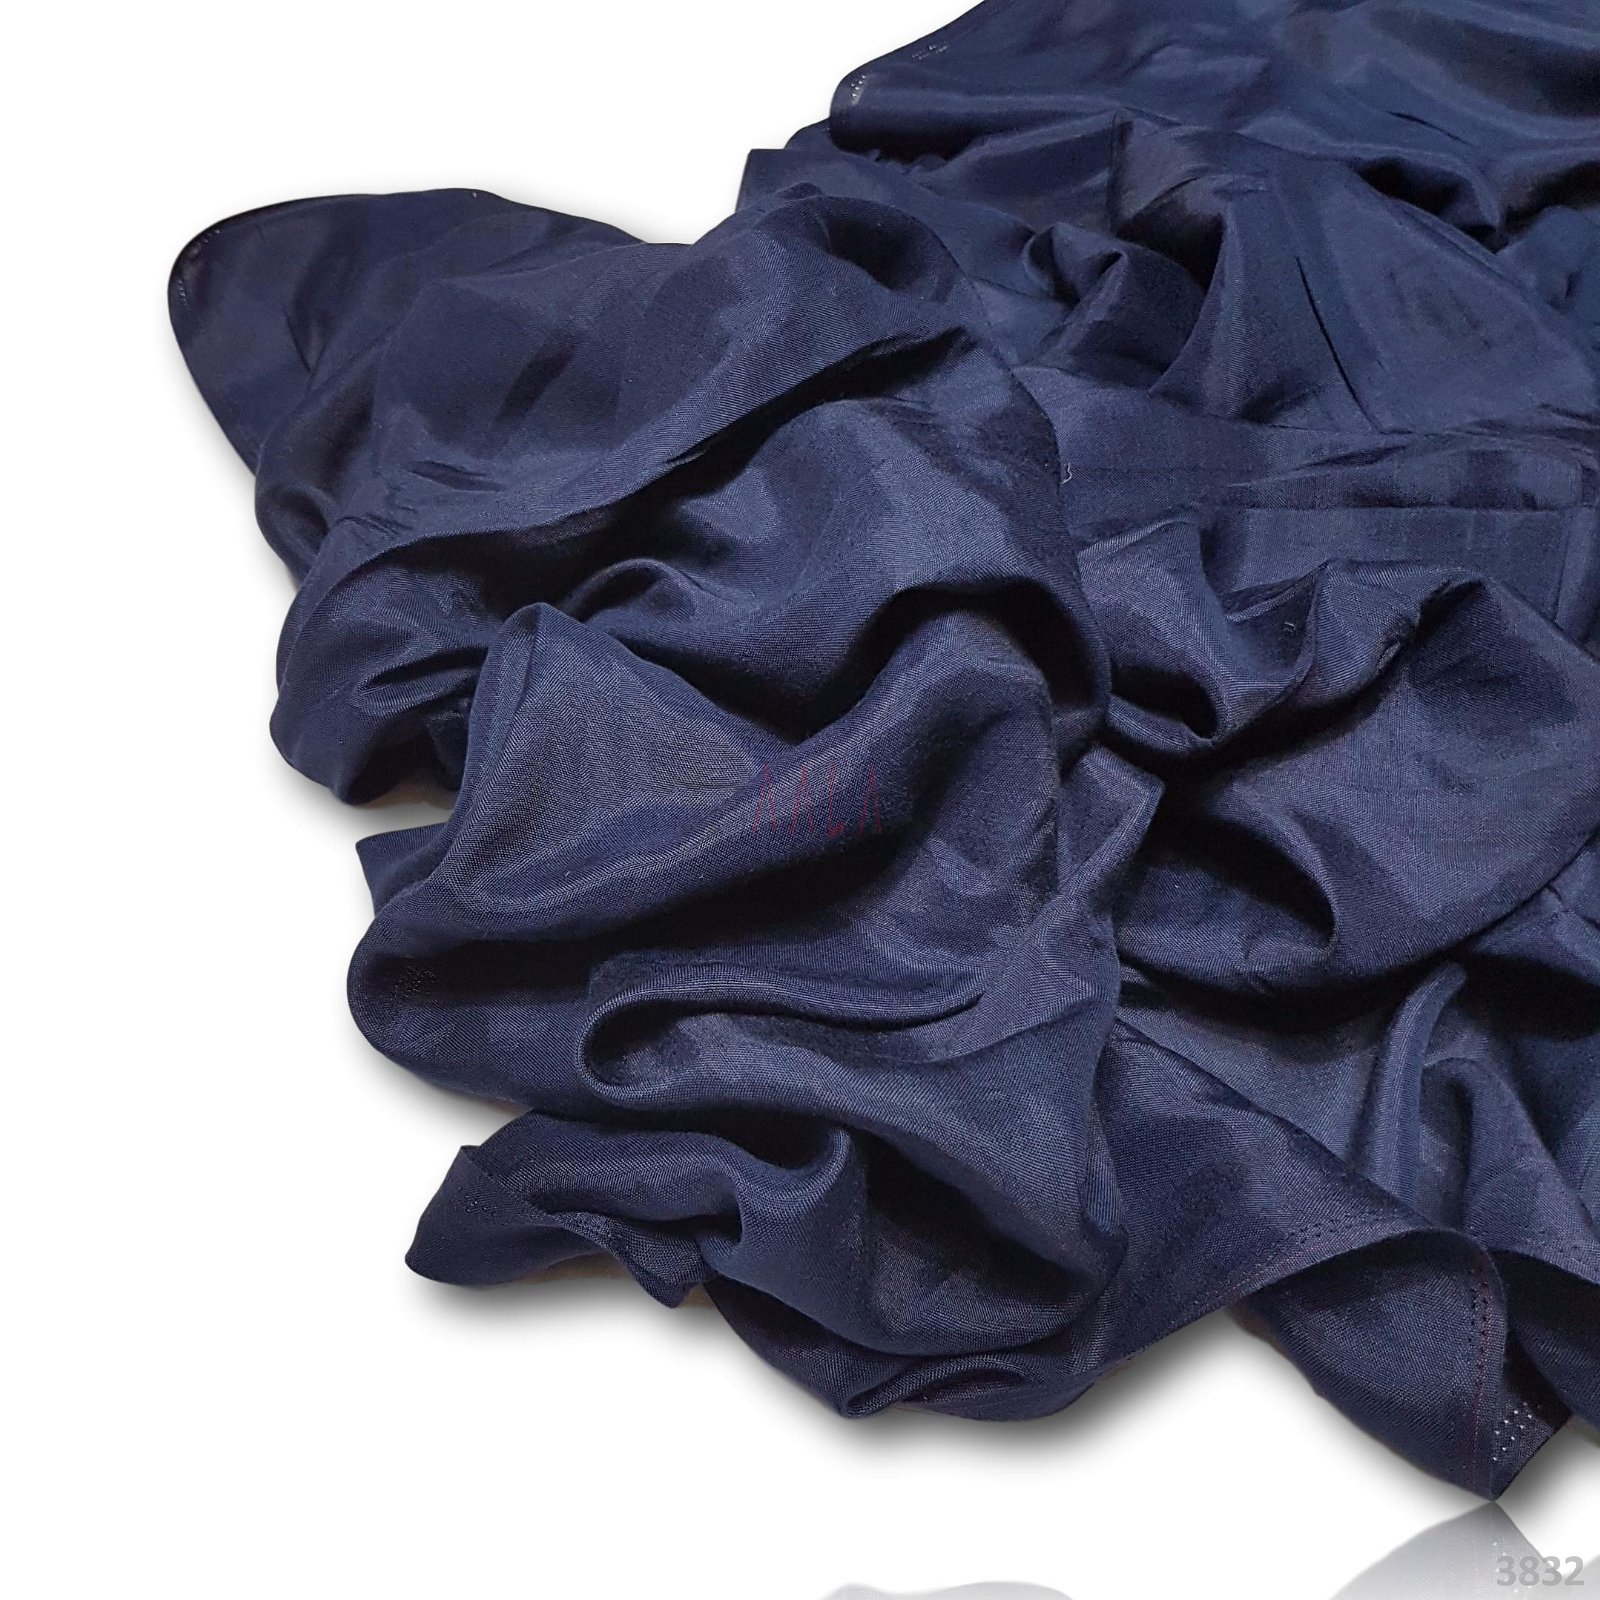 Shantung Viscose 44 Inches Dyed Per Metre #3832